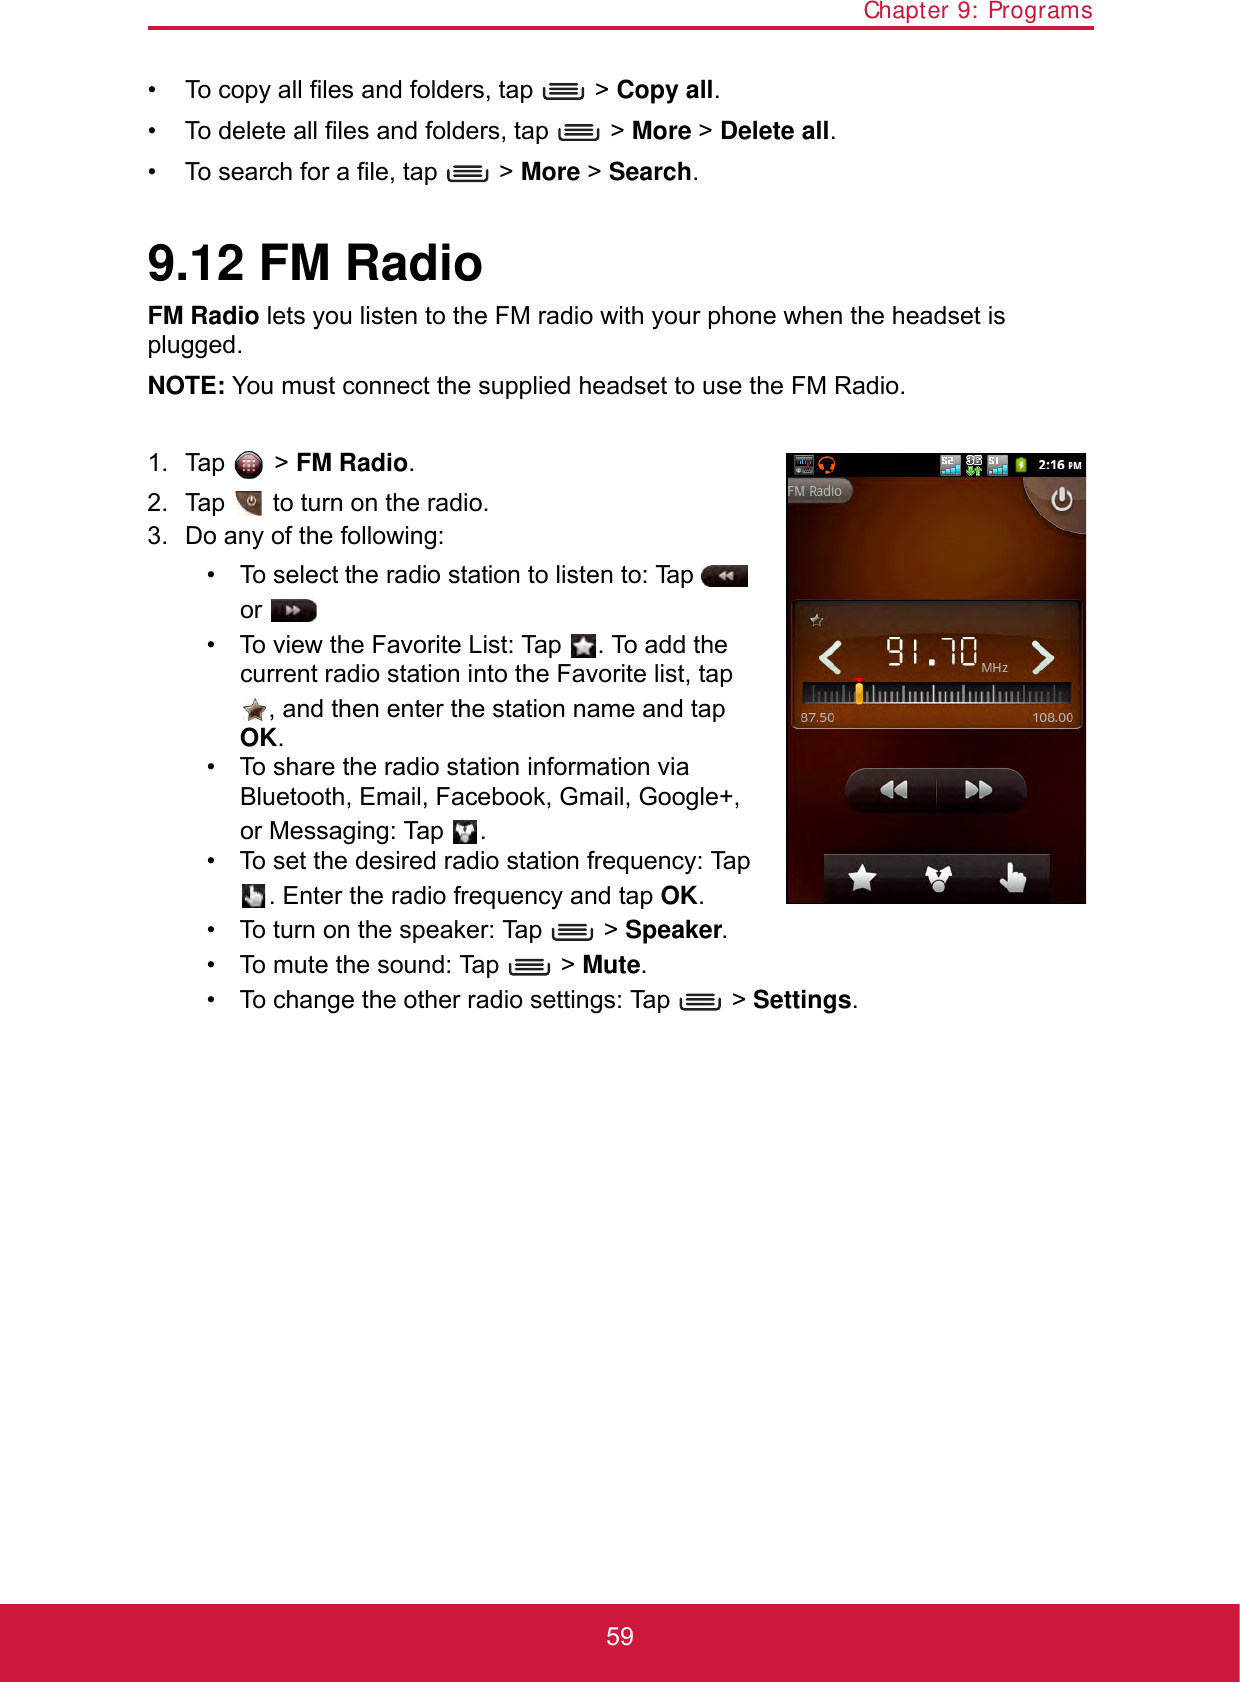 Chapter 9: Programs59• To copy all files and folders, tap   &gt; Copy all.• To delete all files and folders, tap   &gt; More &gt; Delete all. • To search for a file, tap   &gt; More &gt; Search.9.12 FM RadioFM Radio lets you listen to the FM radio with your phone when the headset is plugged.NOTE: You must connect the supplied headset to use the FM Radio.1. Tap  &gt; FM Radio.2. Tap   to turn on the radio.3. Do any of the following:• To select the radio station to listen to: Tap    or .• To view the Favorite List: Tap  . To add the current radio station into the Favorite list, tap , and then enter the station name and tap OK.• To share the radio station information via Bluetooth, Email, Facebook, Gmail, Google+, or Messaging: Tap  .• To set the desired radio station frequency: Tap . Enter the radio frequency and tap OK.• To turn on the speaker: Tap   &gt; Speaker.• To mute the sound: Tap   &gt; Mute.• To change the other radio settings: Tap   &gt; Settings.